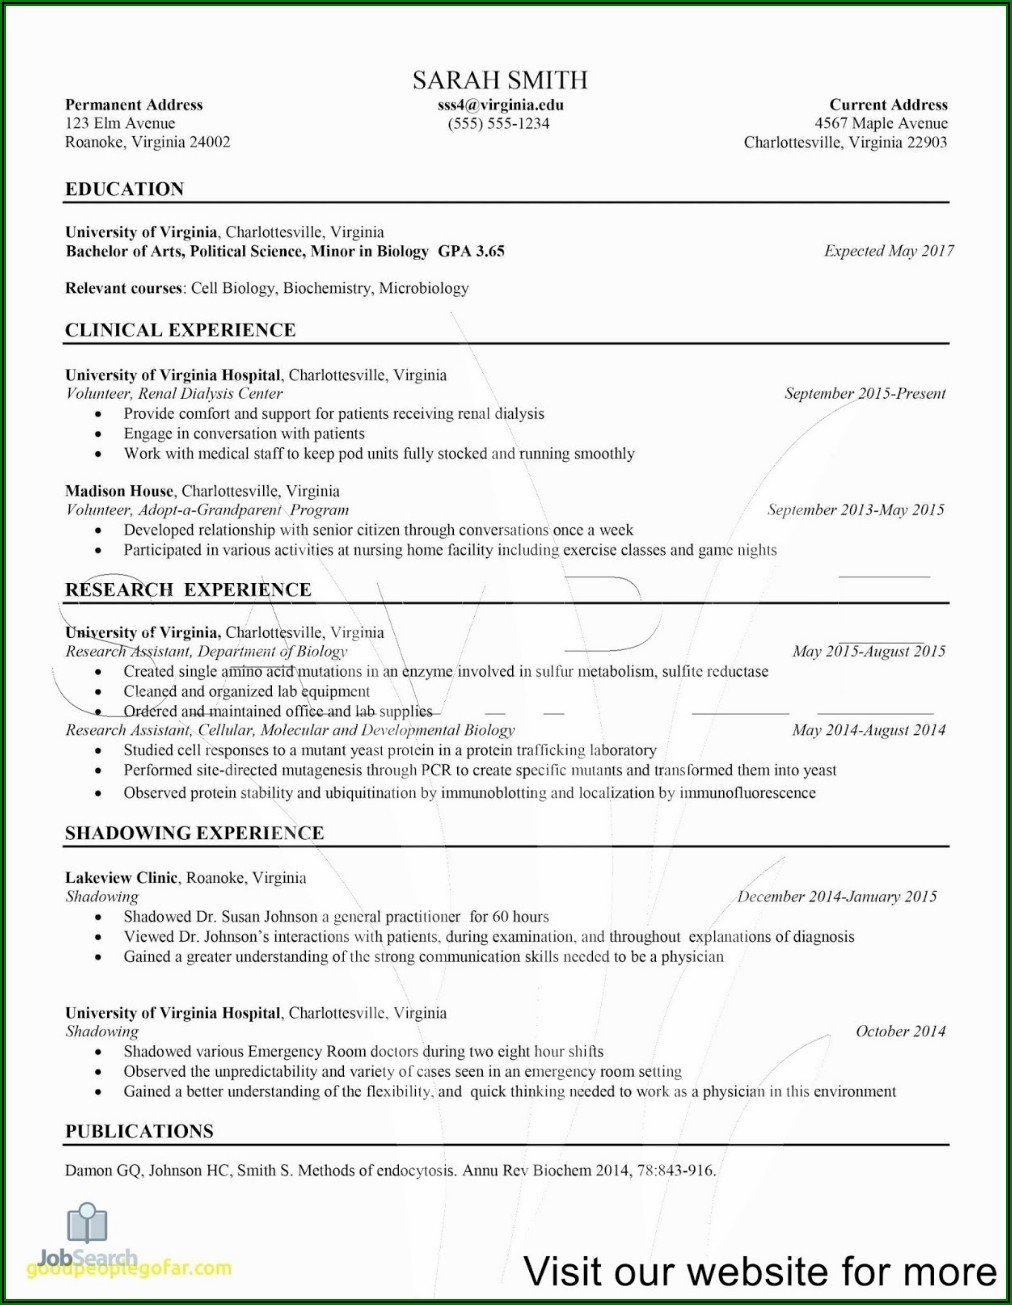 Resume For Medical Assistant With No Experience